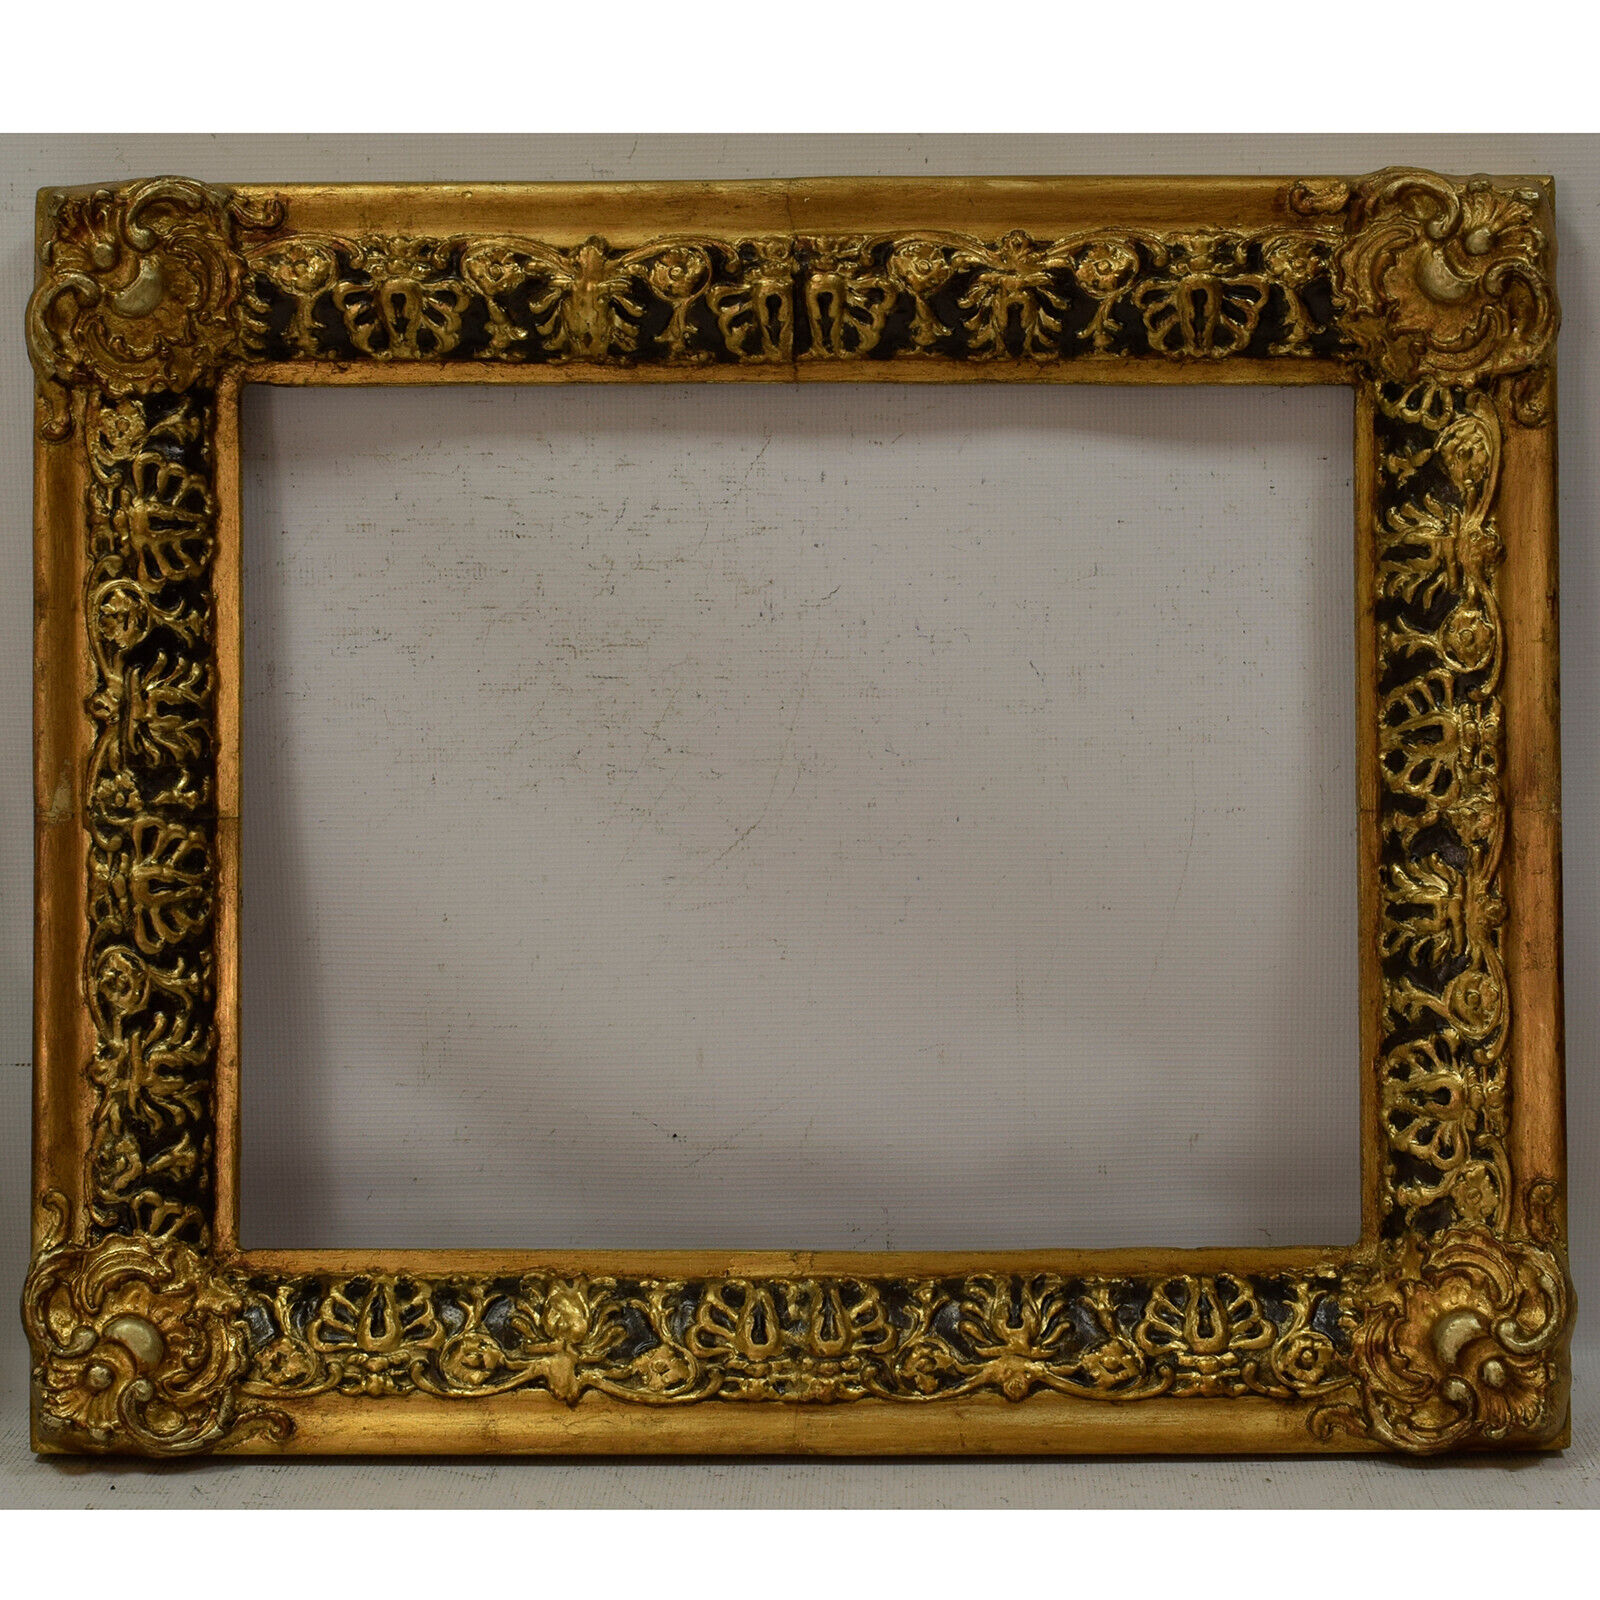 Ca1900-1930 Old wooden frame decorative with metal leaf Internal: 21,2x16,5 in